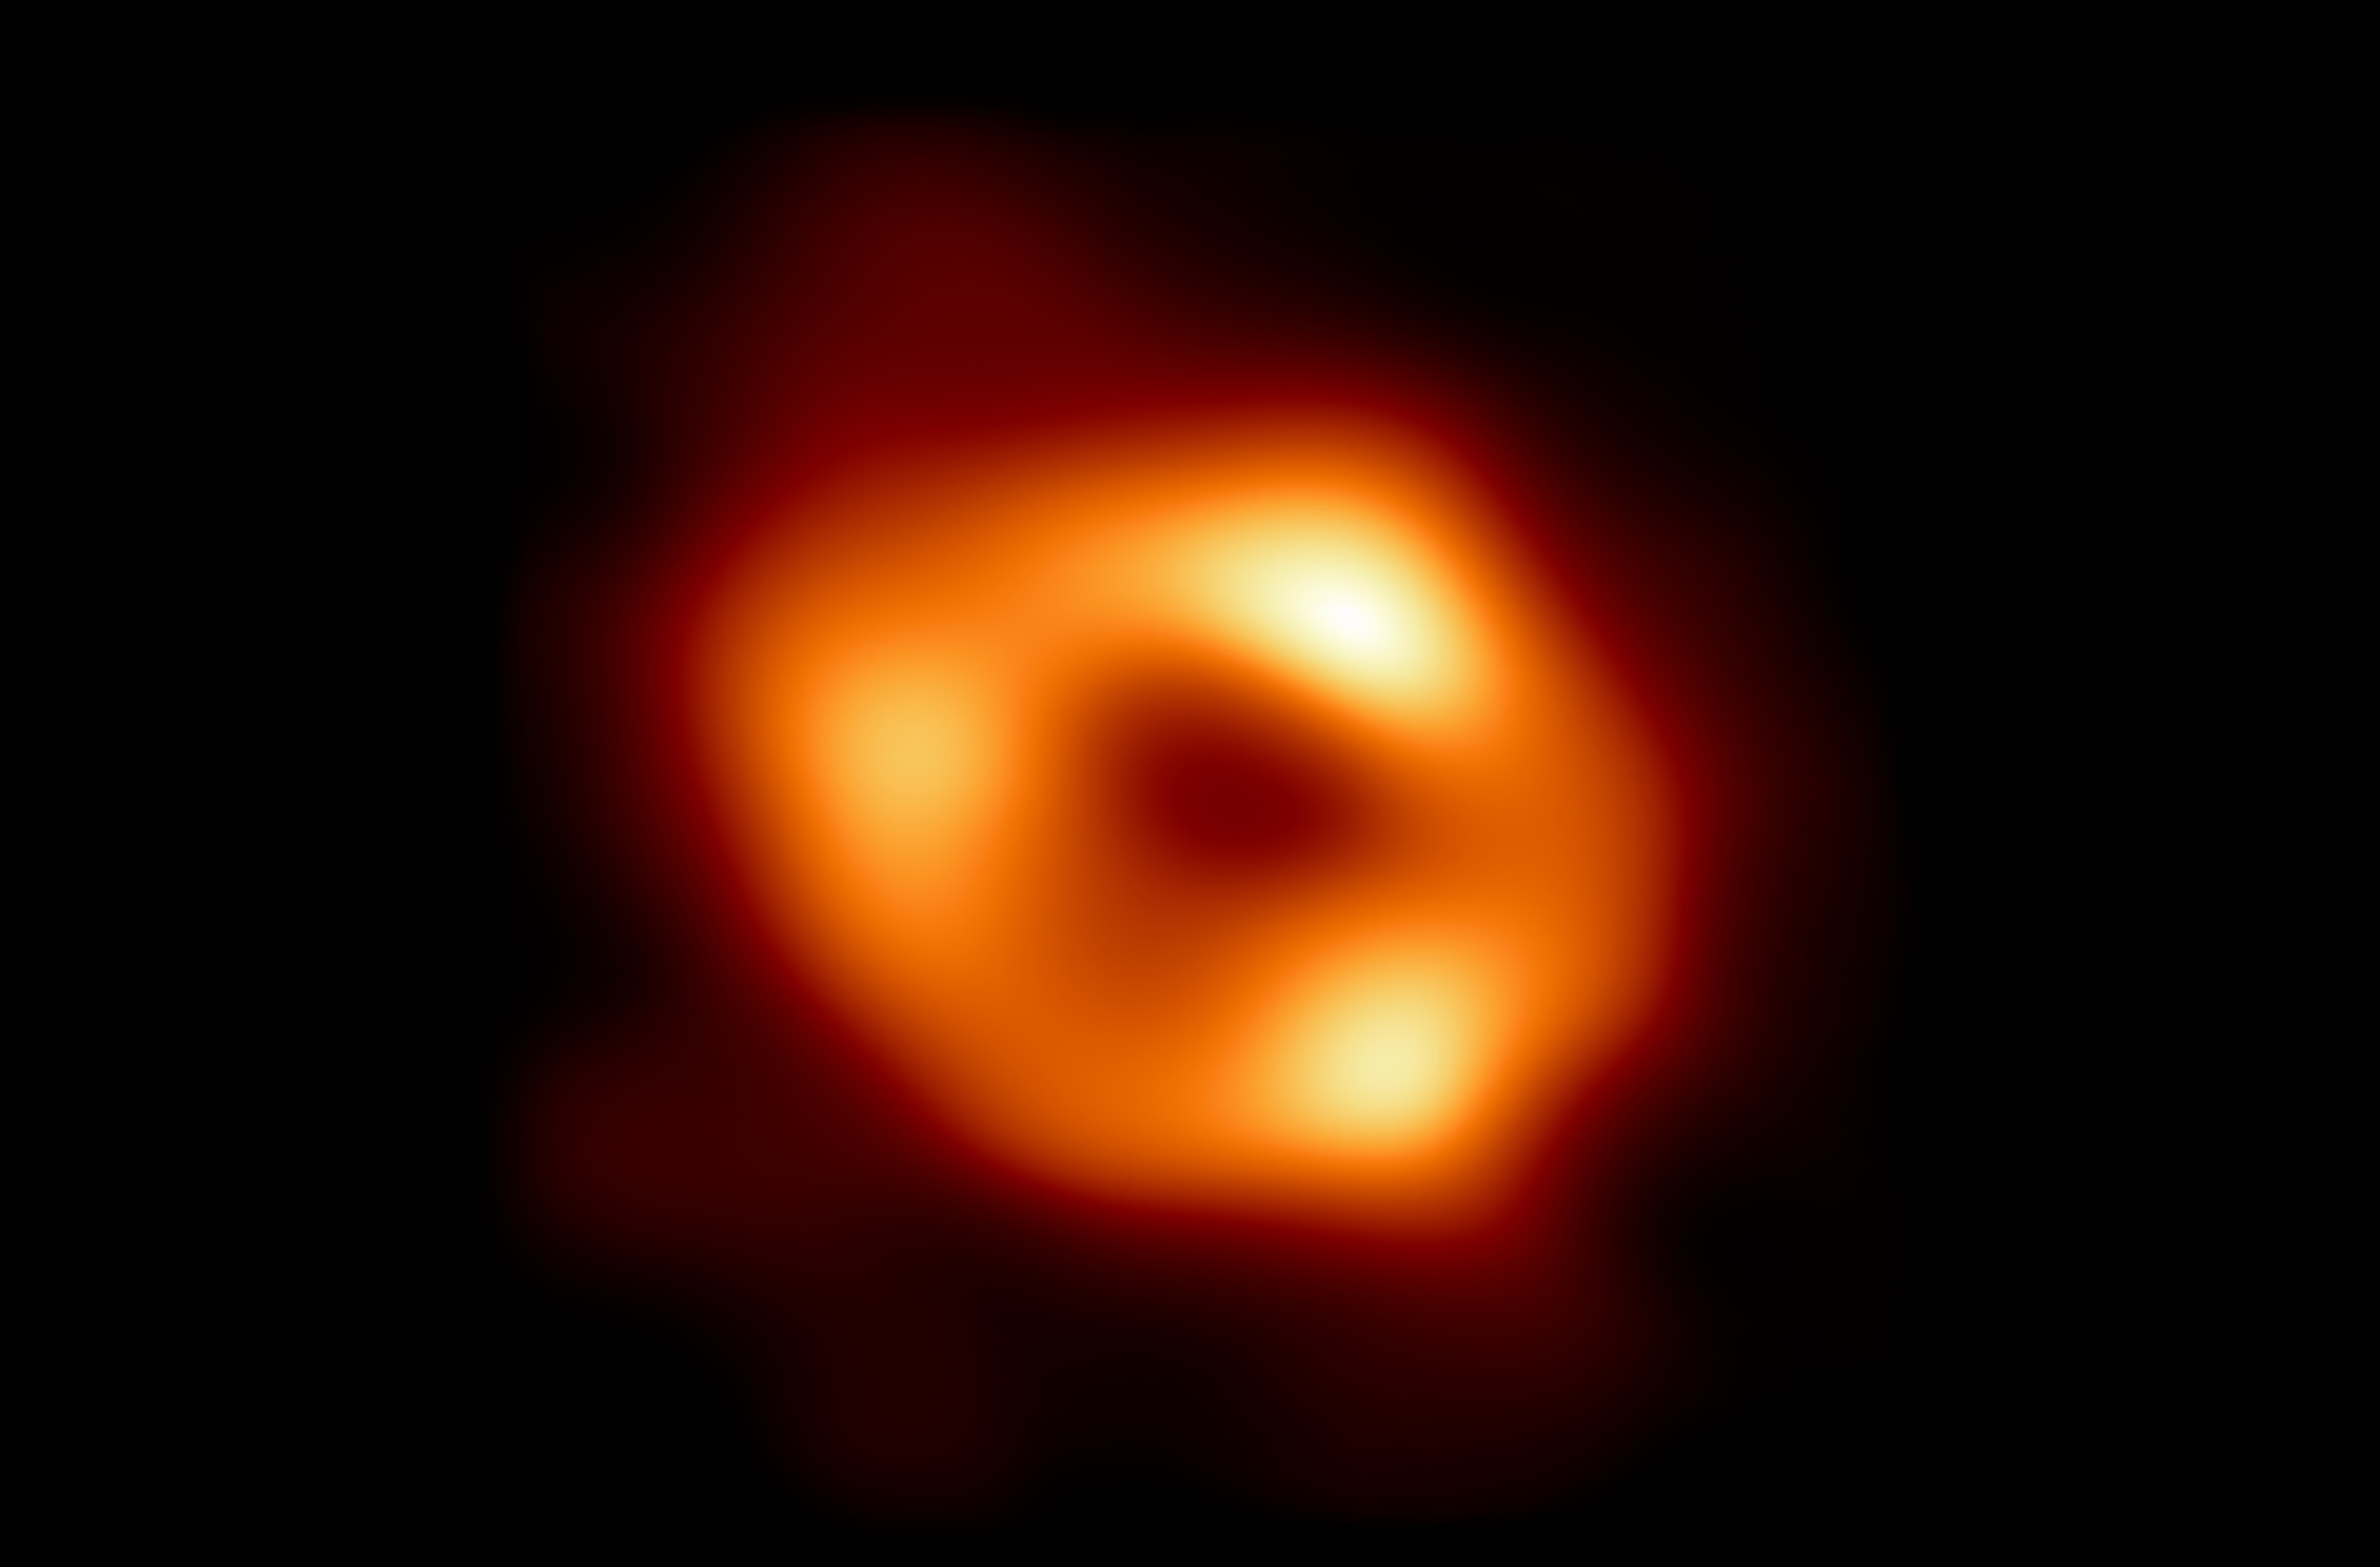 Black hole image is where observation meets simulation – TechCrunch